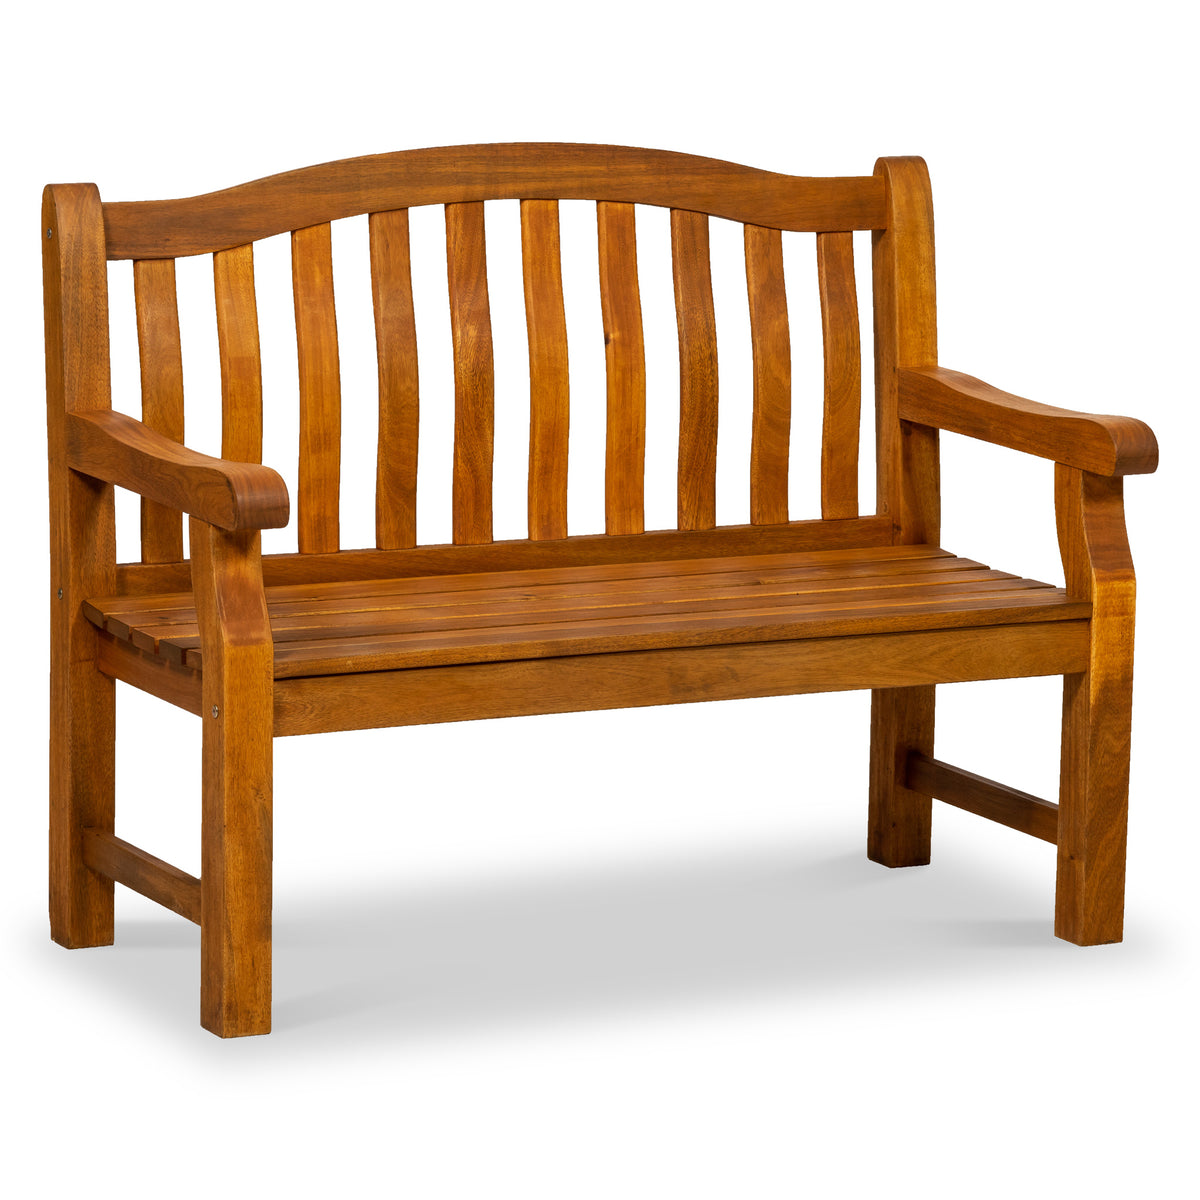 Lytham FSC Acacia 2 Seater Bench from Roseland